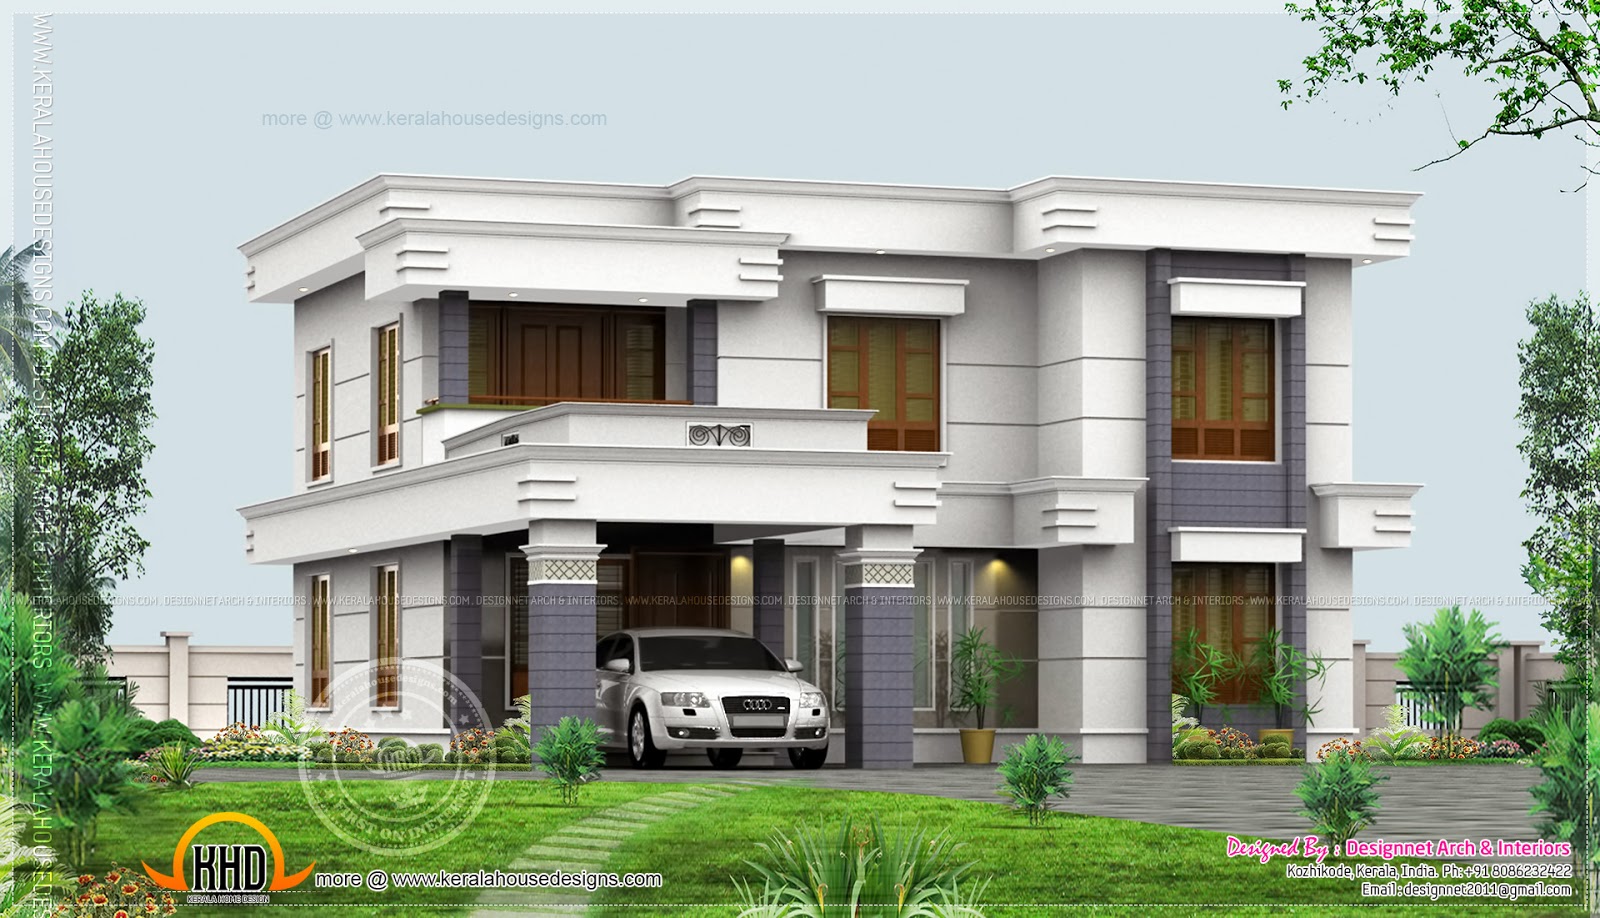 4 bedroom Flat  Roof  design  in 2500 sq ft Indian House  Plans 